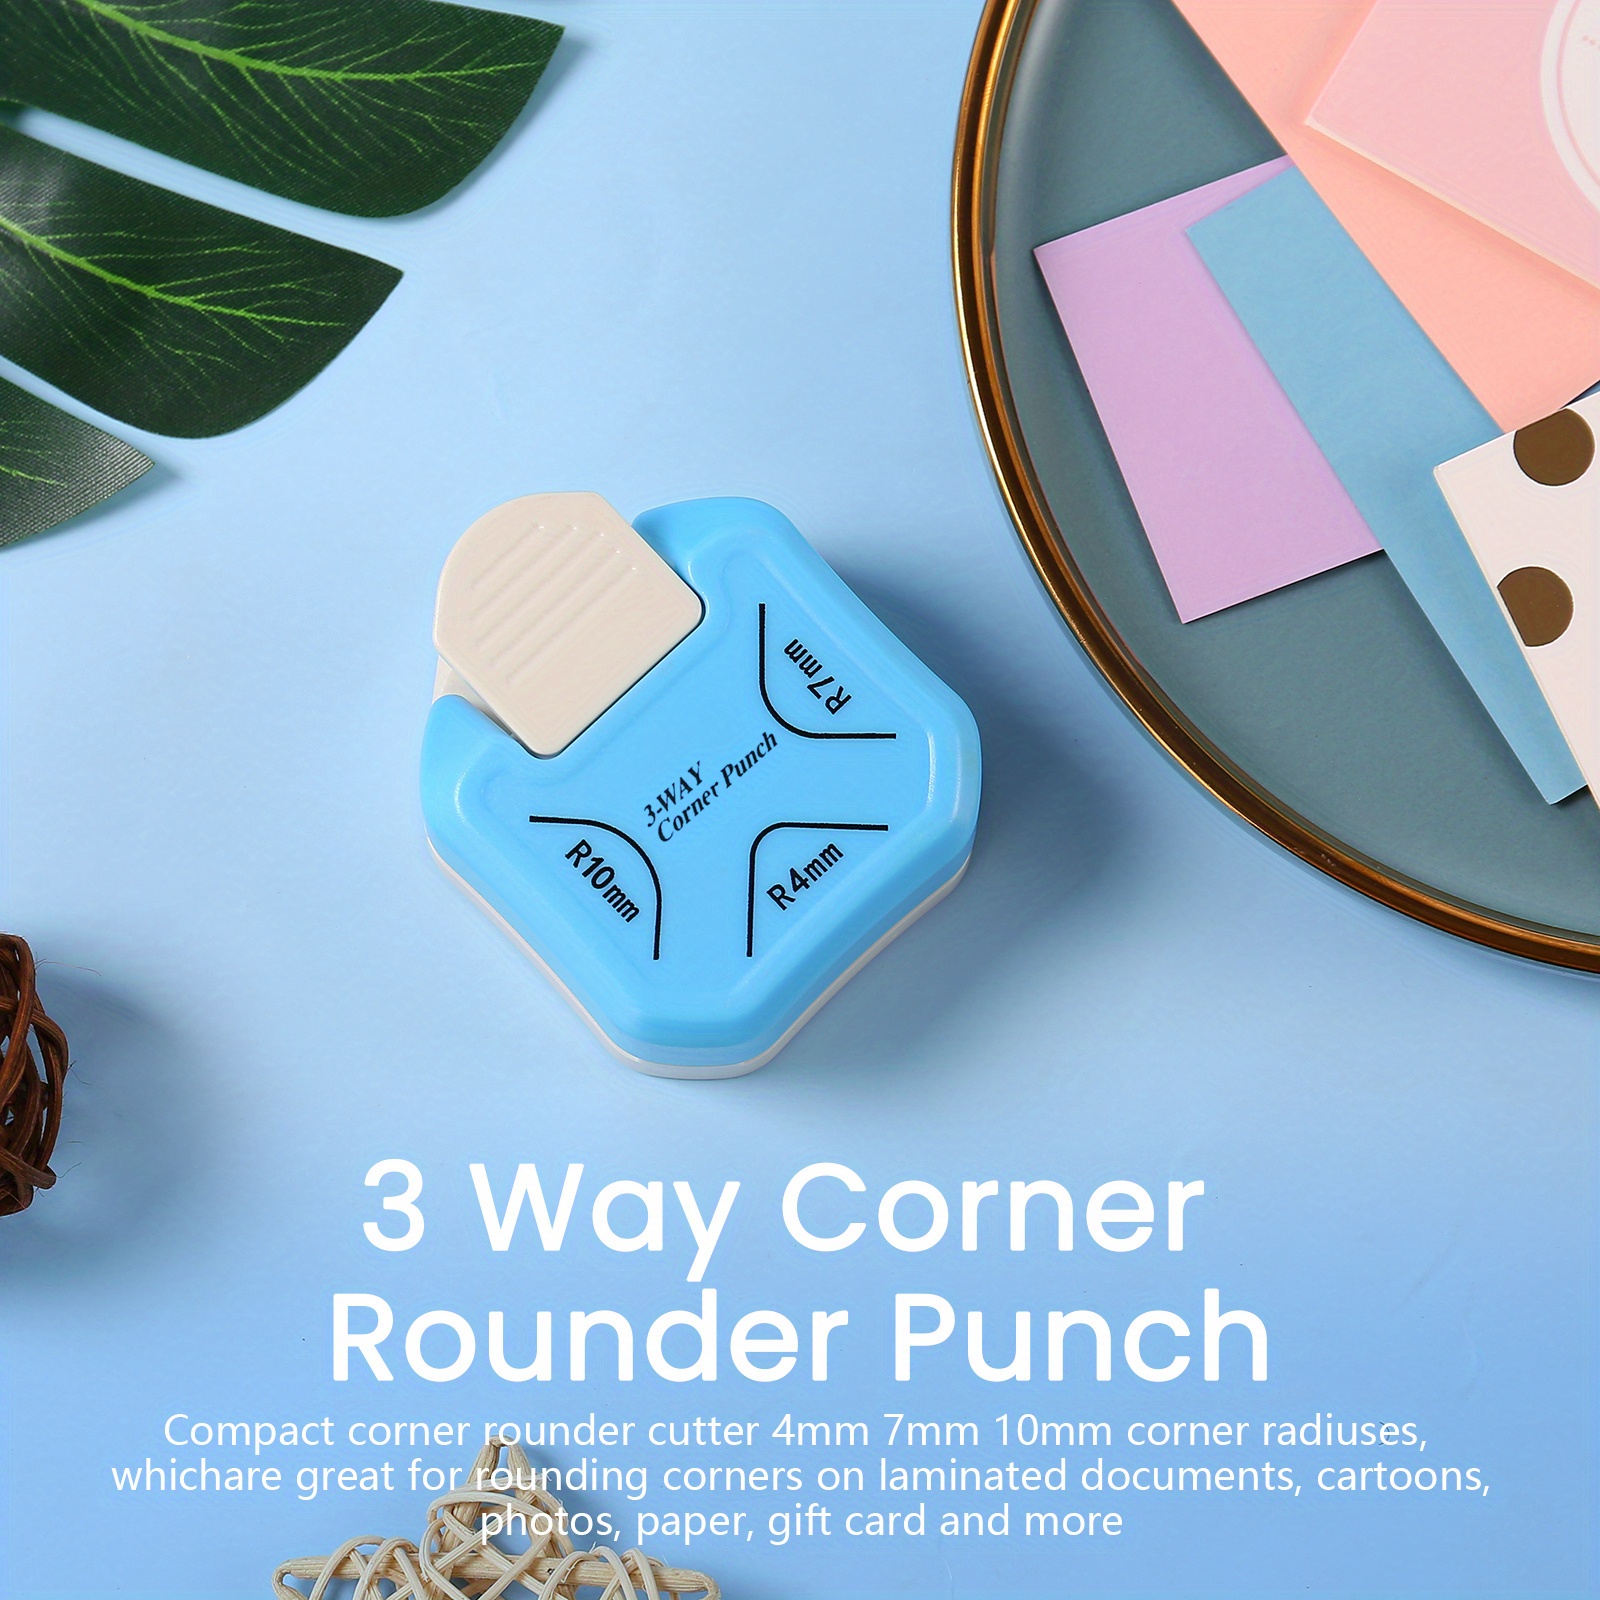 QIQQIKIN Corner Hole Punch 4mm Circle Cutter Punch +R5mm+R10mm 3-Way Corner  Rounder Paper Punch,Cardstock,Laminator,Photocards,Scrapbooking,Die Cuts